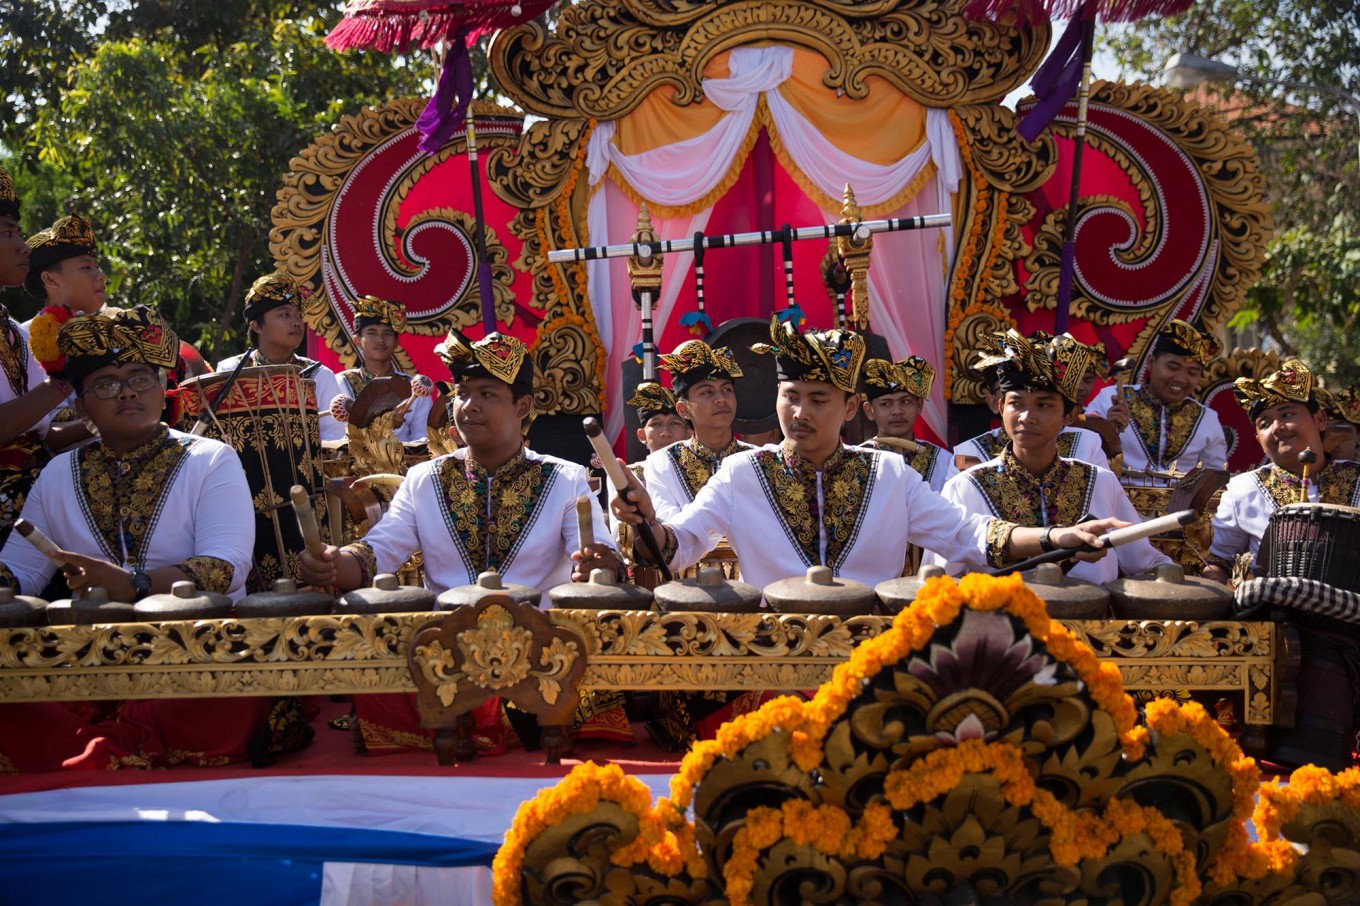 Young Balinese men play in a gambean (Balinese orchestra) during the opening of the 39th Bali Art Festival at the Bajra Sandhi Monument in Denpasar. Image: JP/Agung Parameswara